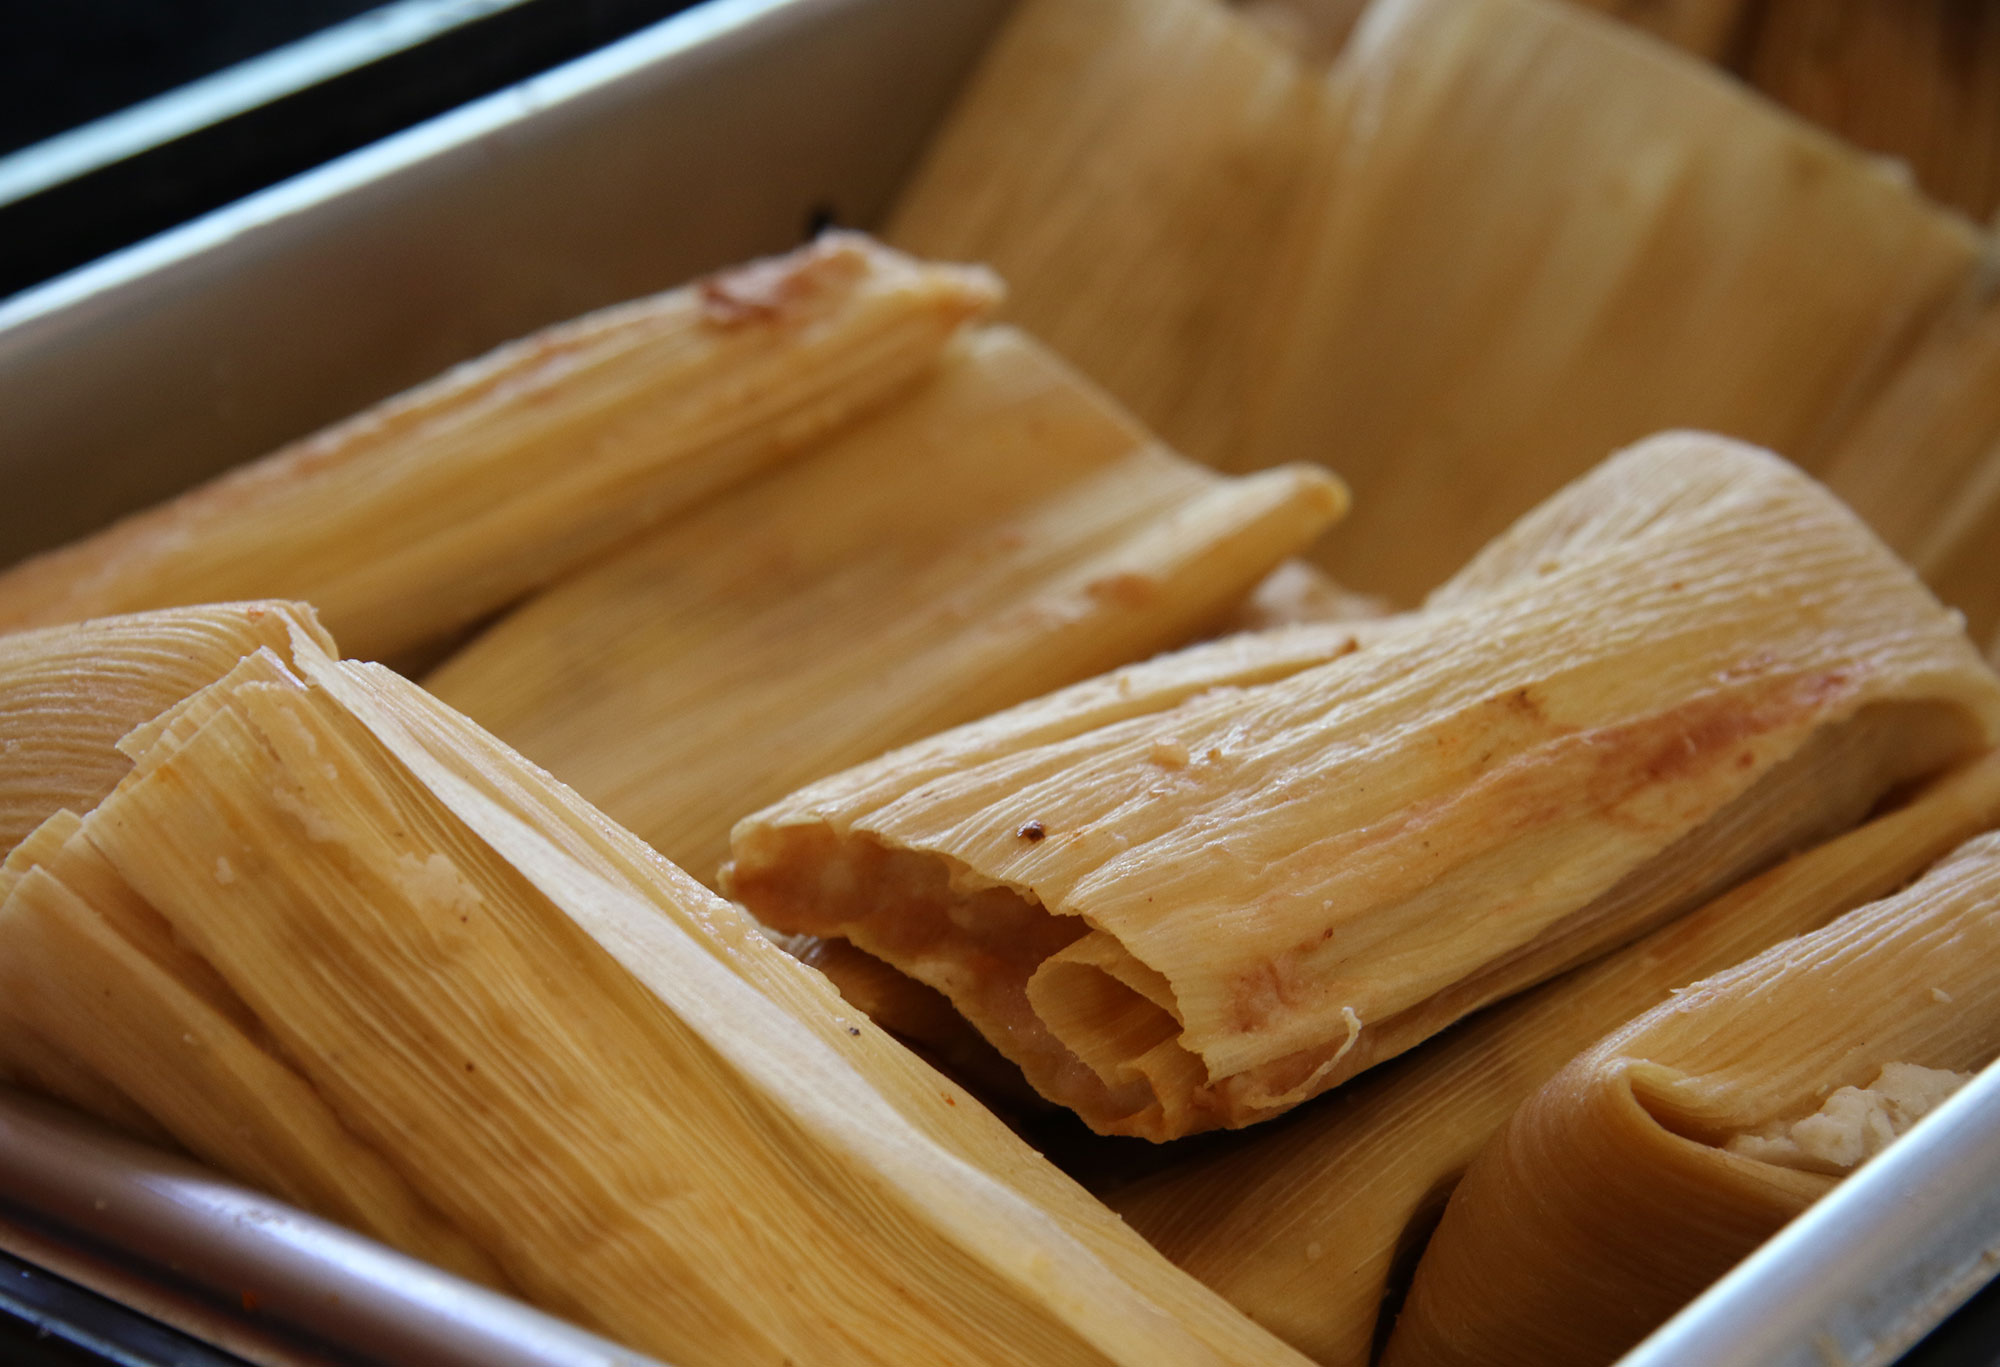 Bean and cheese tamales at Tamales Mana. Heather Irwin/PD